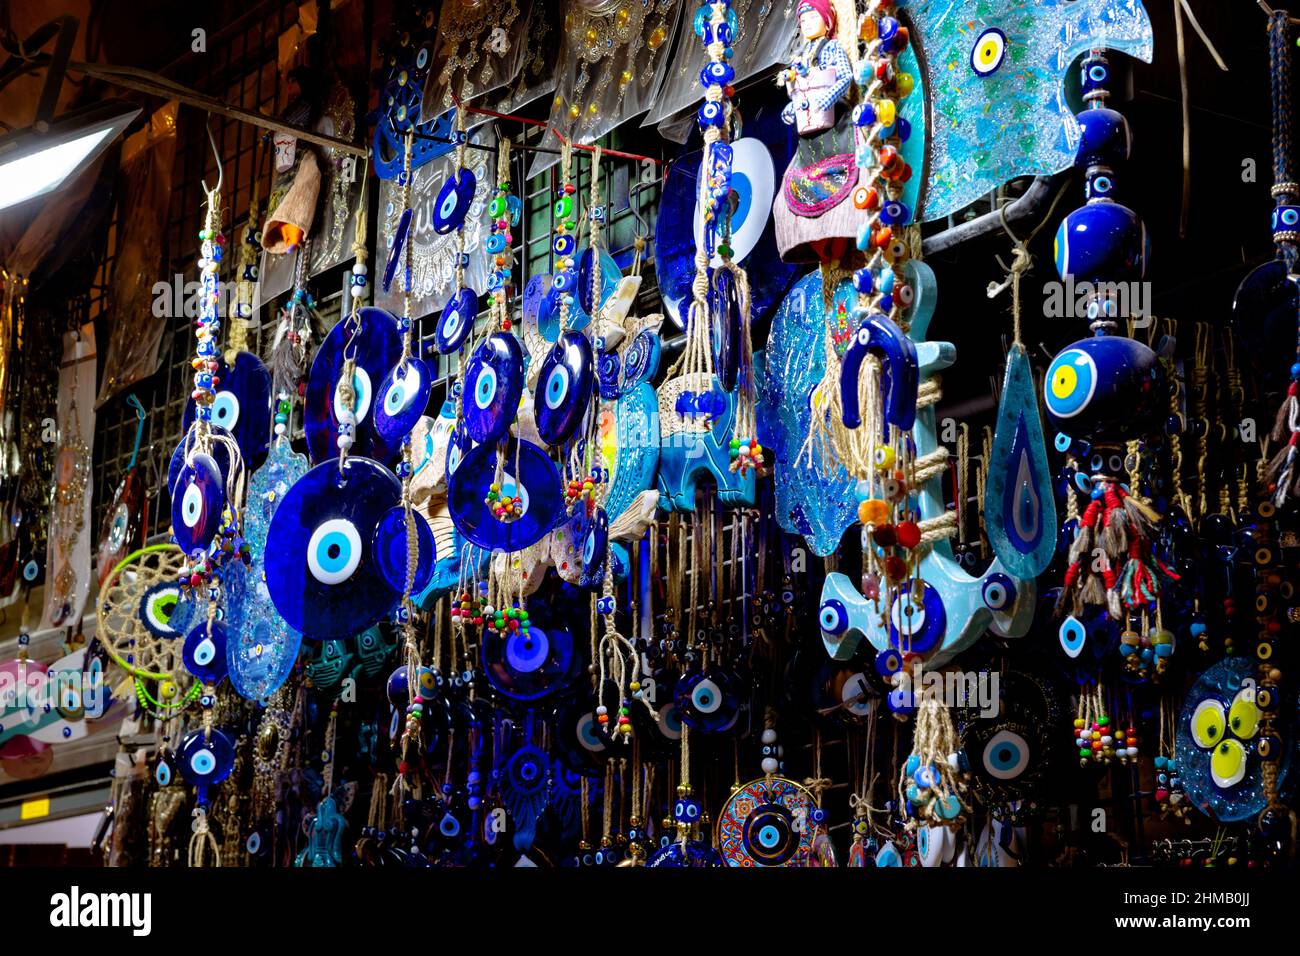 Nazar boncugu or evil eye beads hanging on the shop in Grand Bazaar Istanbul. Souvenirs or gifts from Turkey. Stock Photo